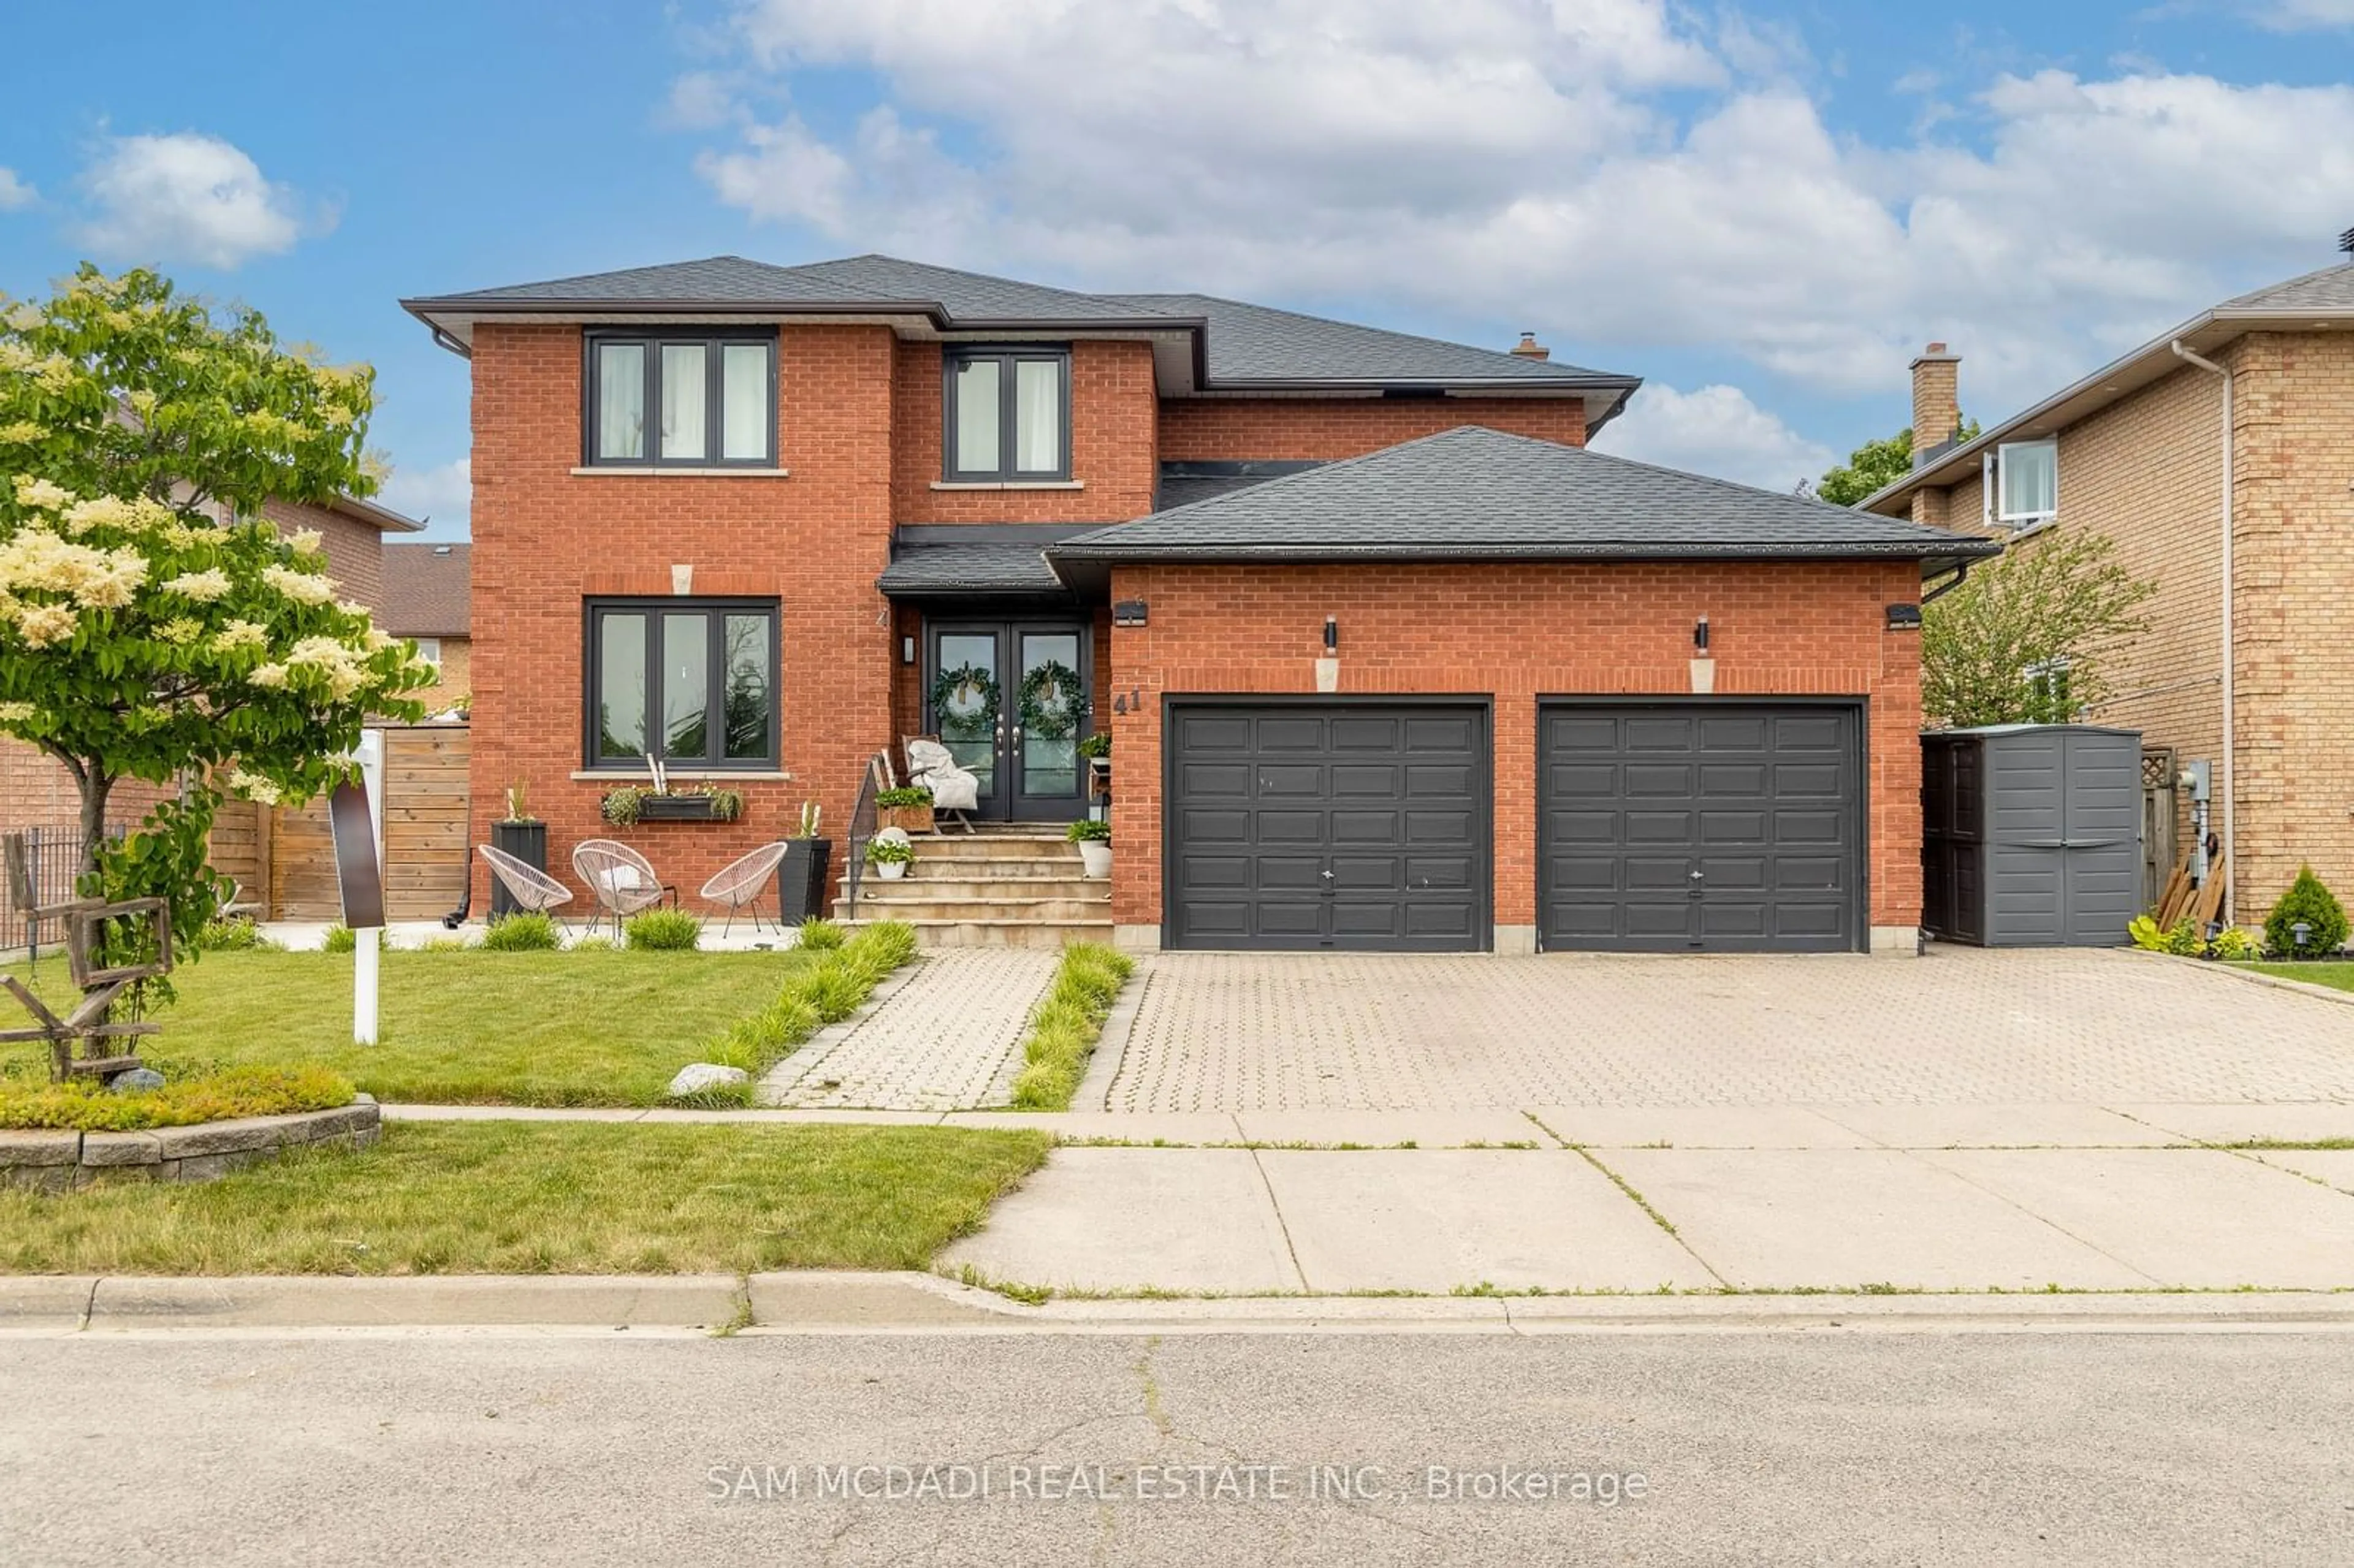 Home with brick exterior material for 41 Regalview Dr, Hamilton Ontario L8G 4Y6